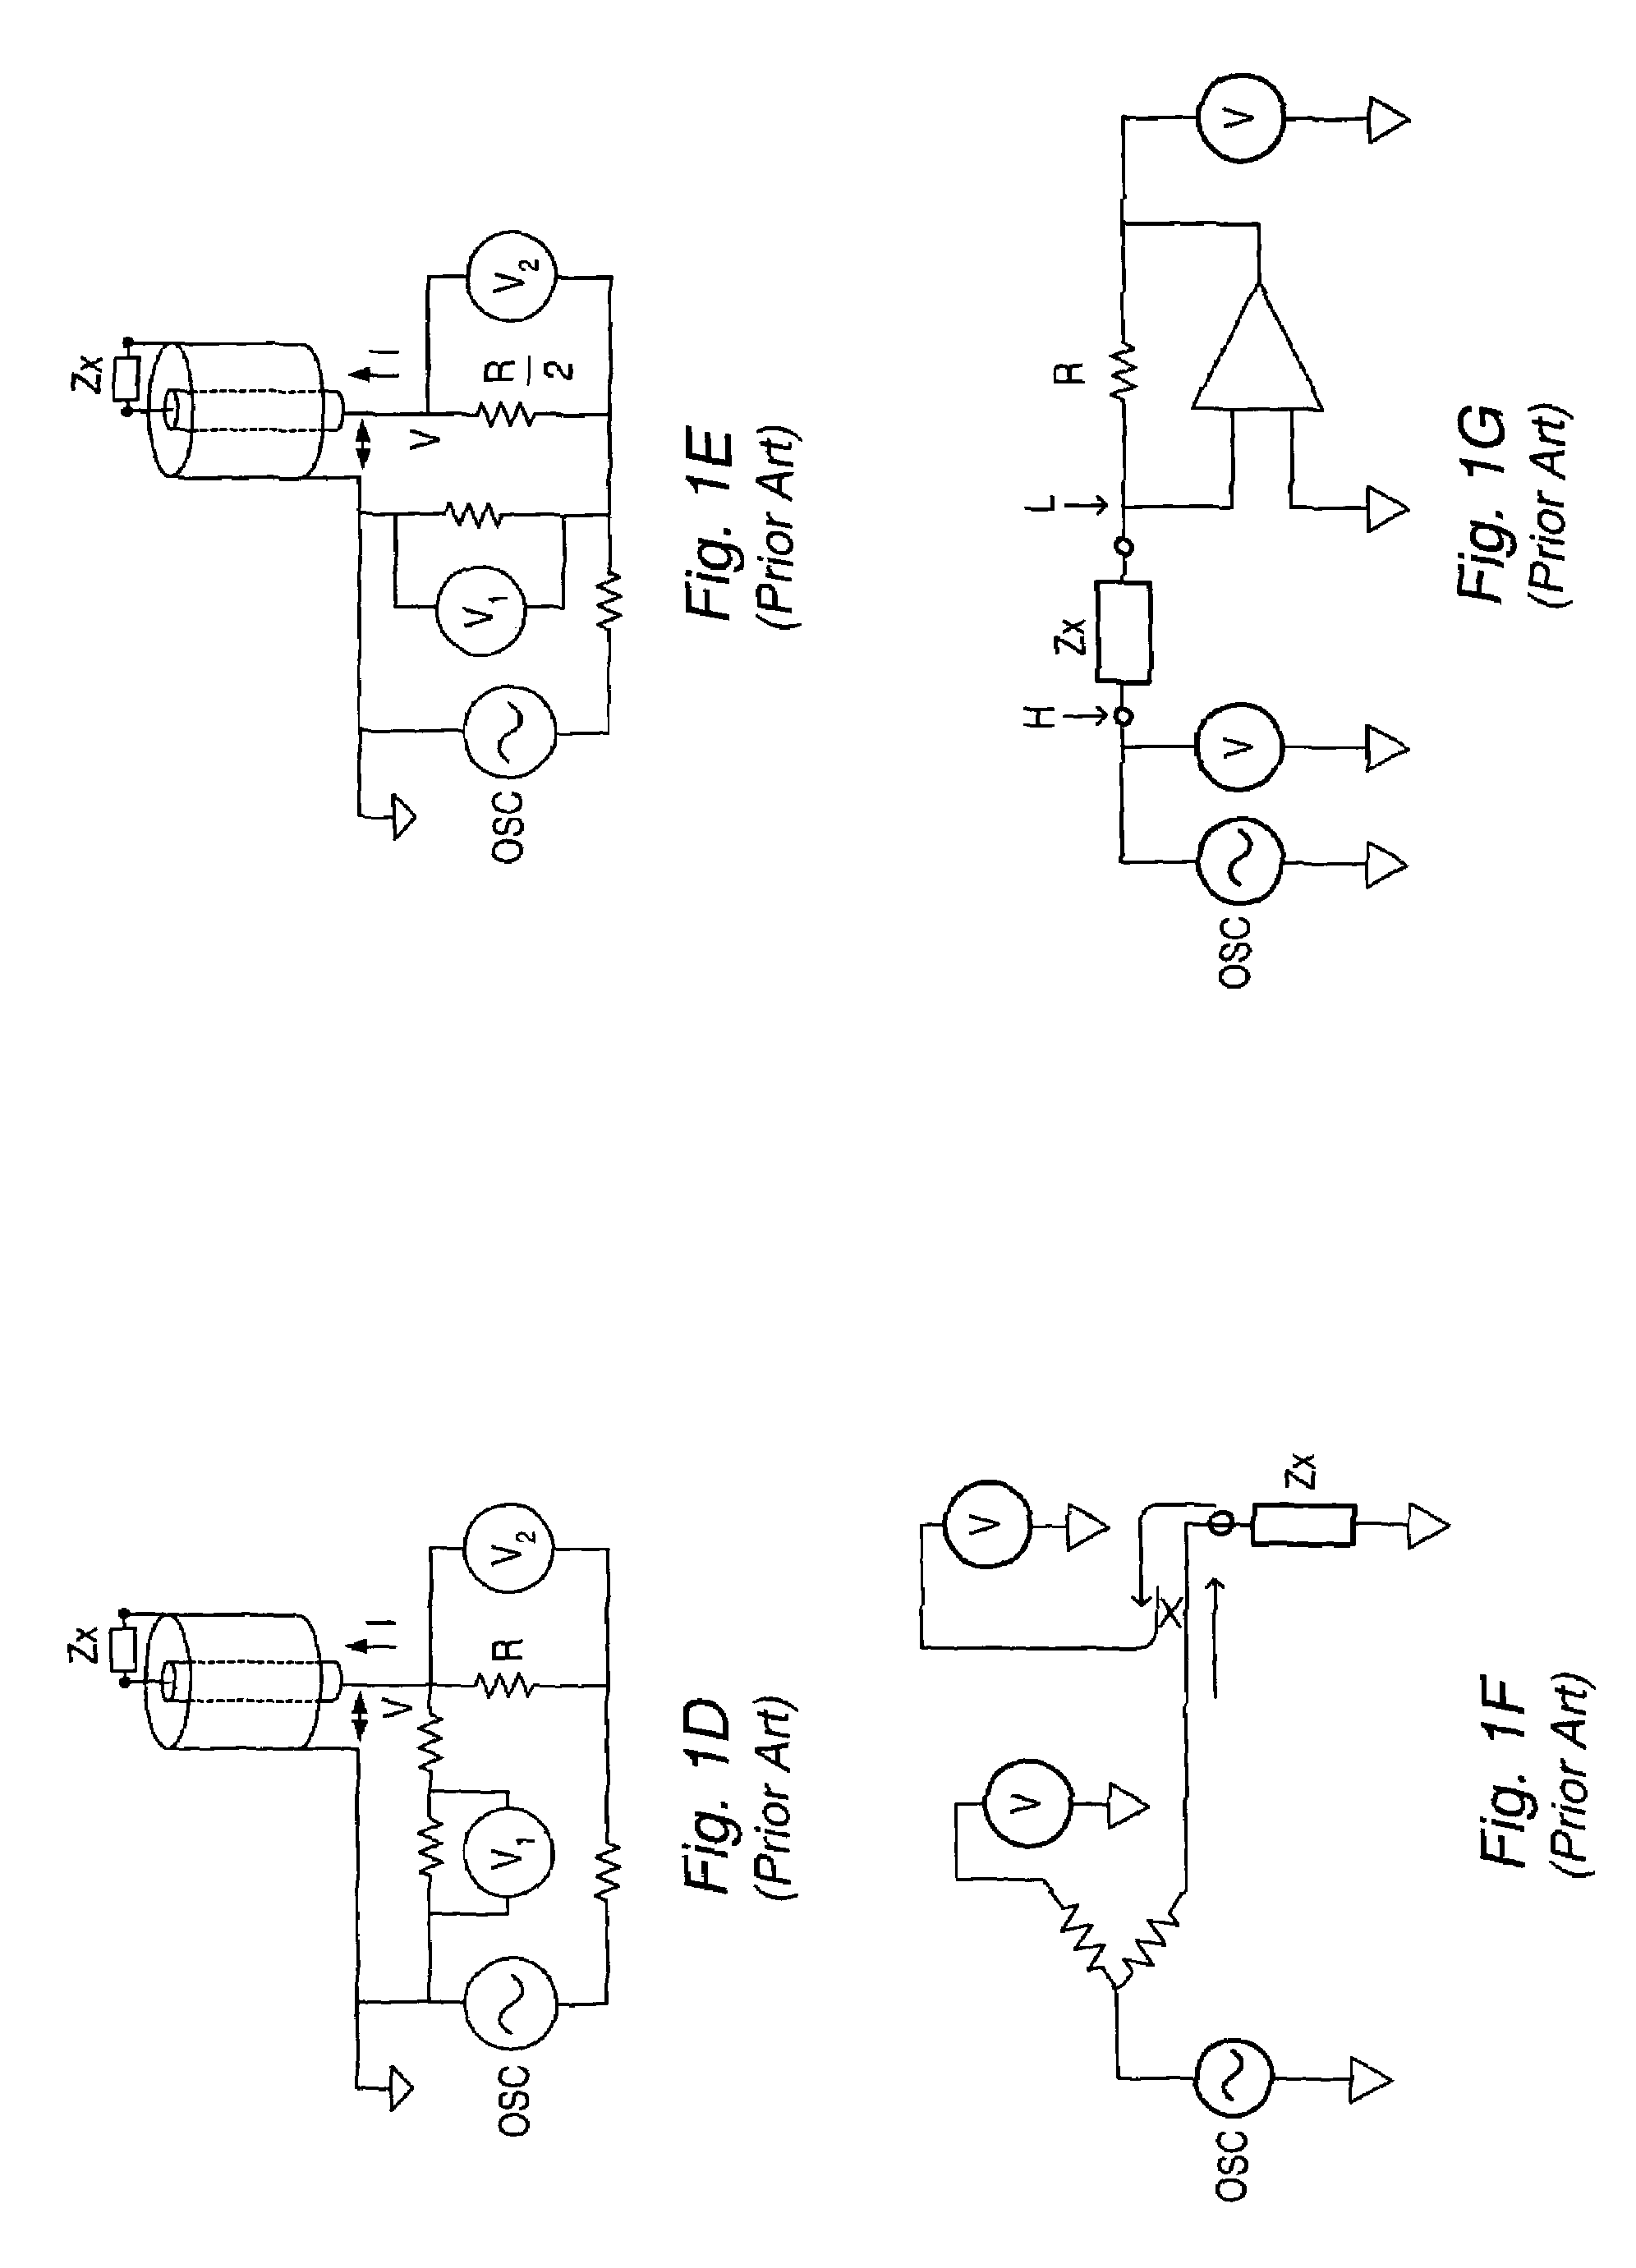 Capacitance, inductance and impedance measurements using multi-tone stimulation and DSP algorithms